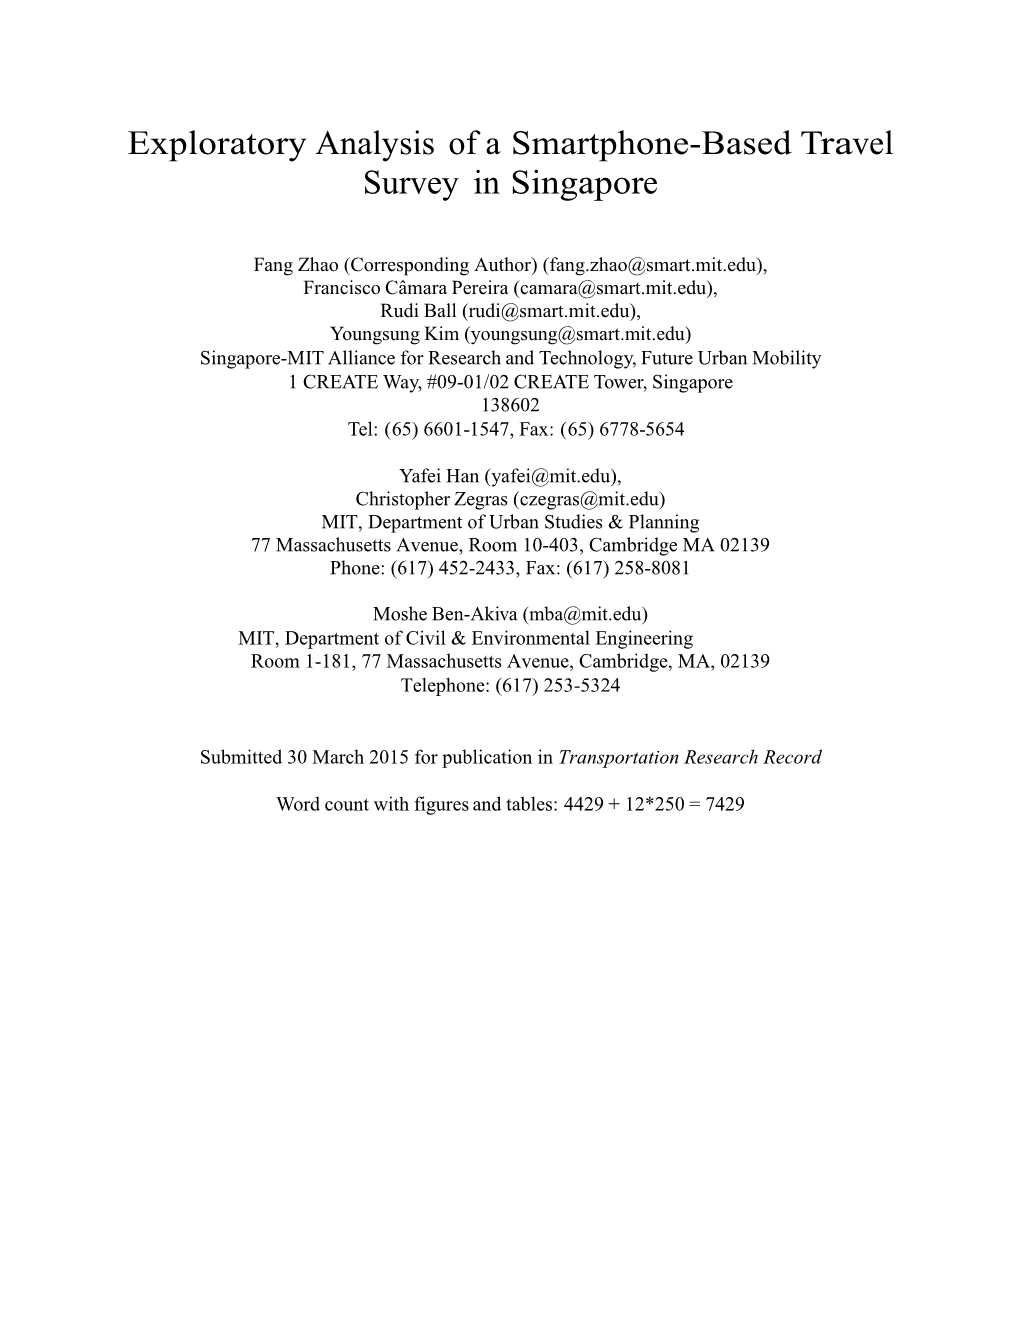 Exploratory Analysis of a Smartphone-Based Travel Survey in Singapore